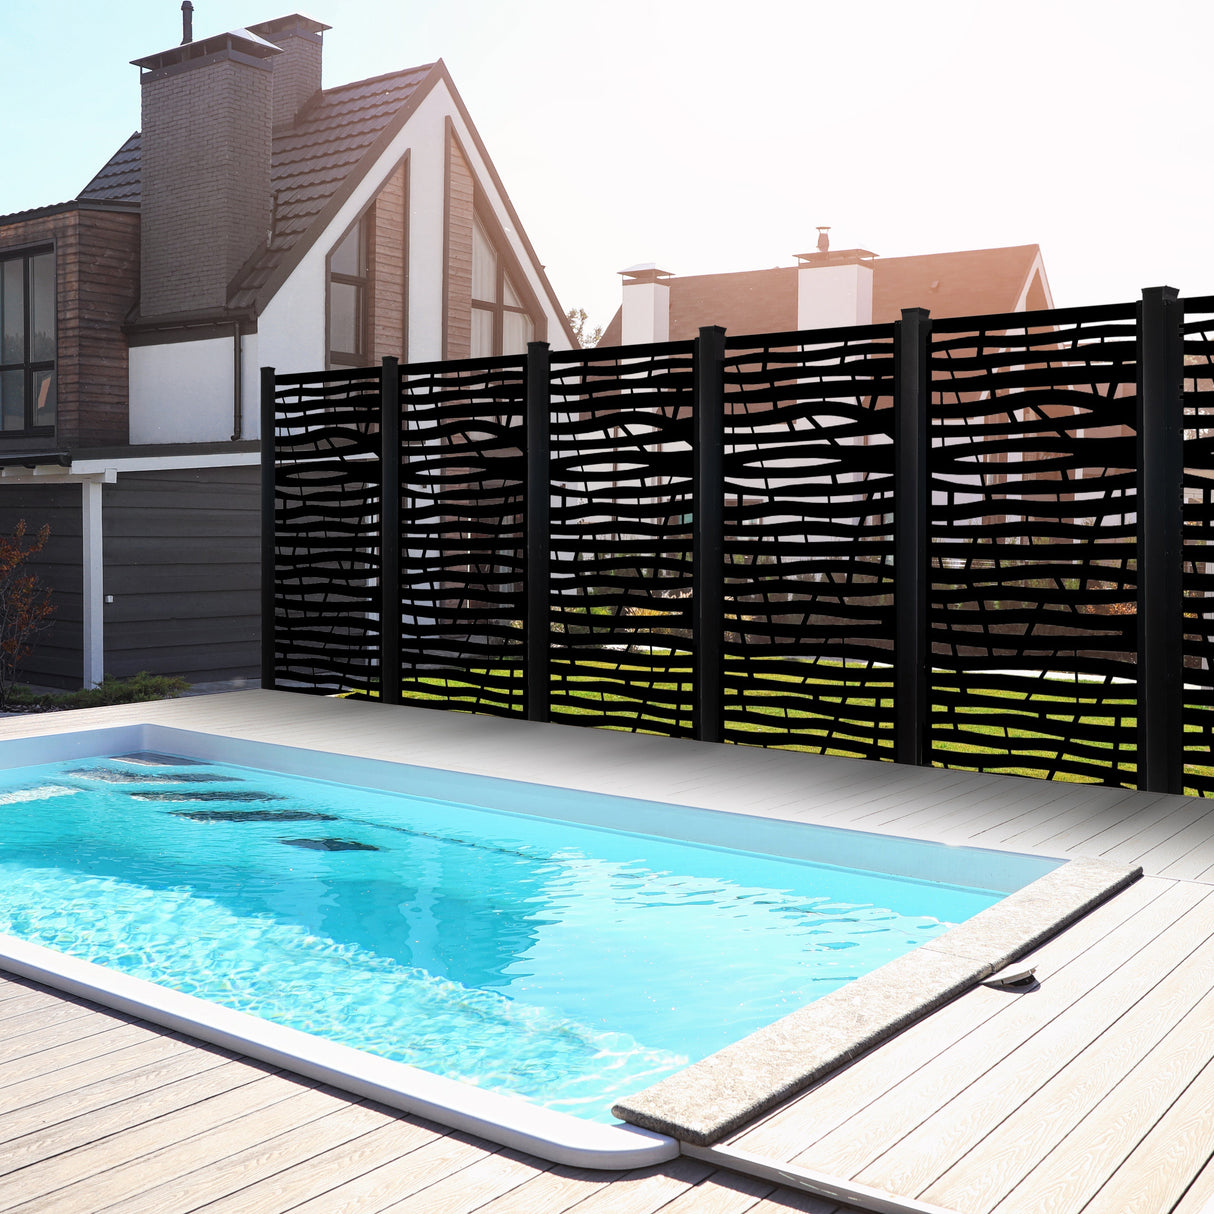 Oasis™ Aluminum Privacy Screens - Quebec - ON SALE!